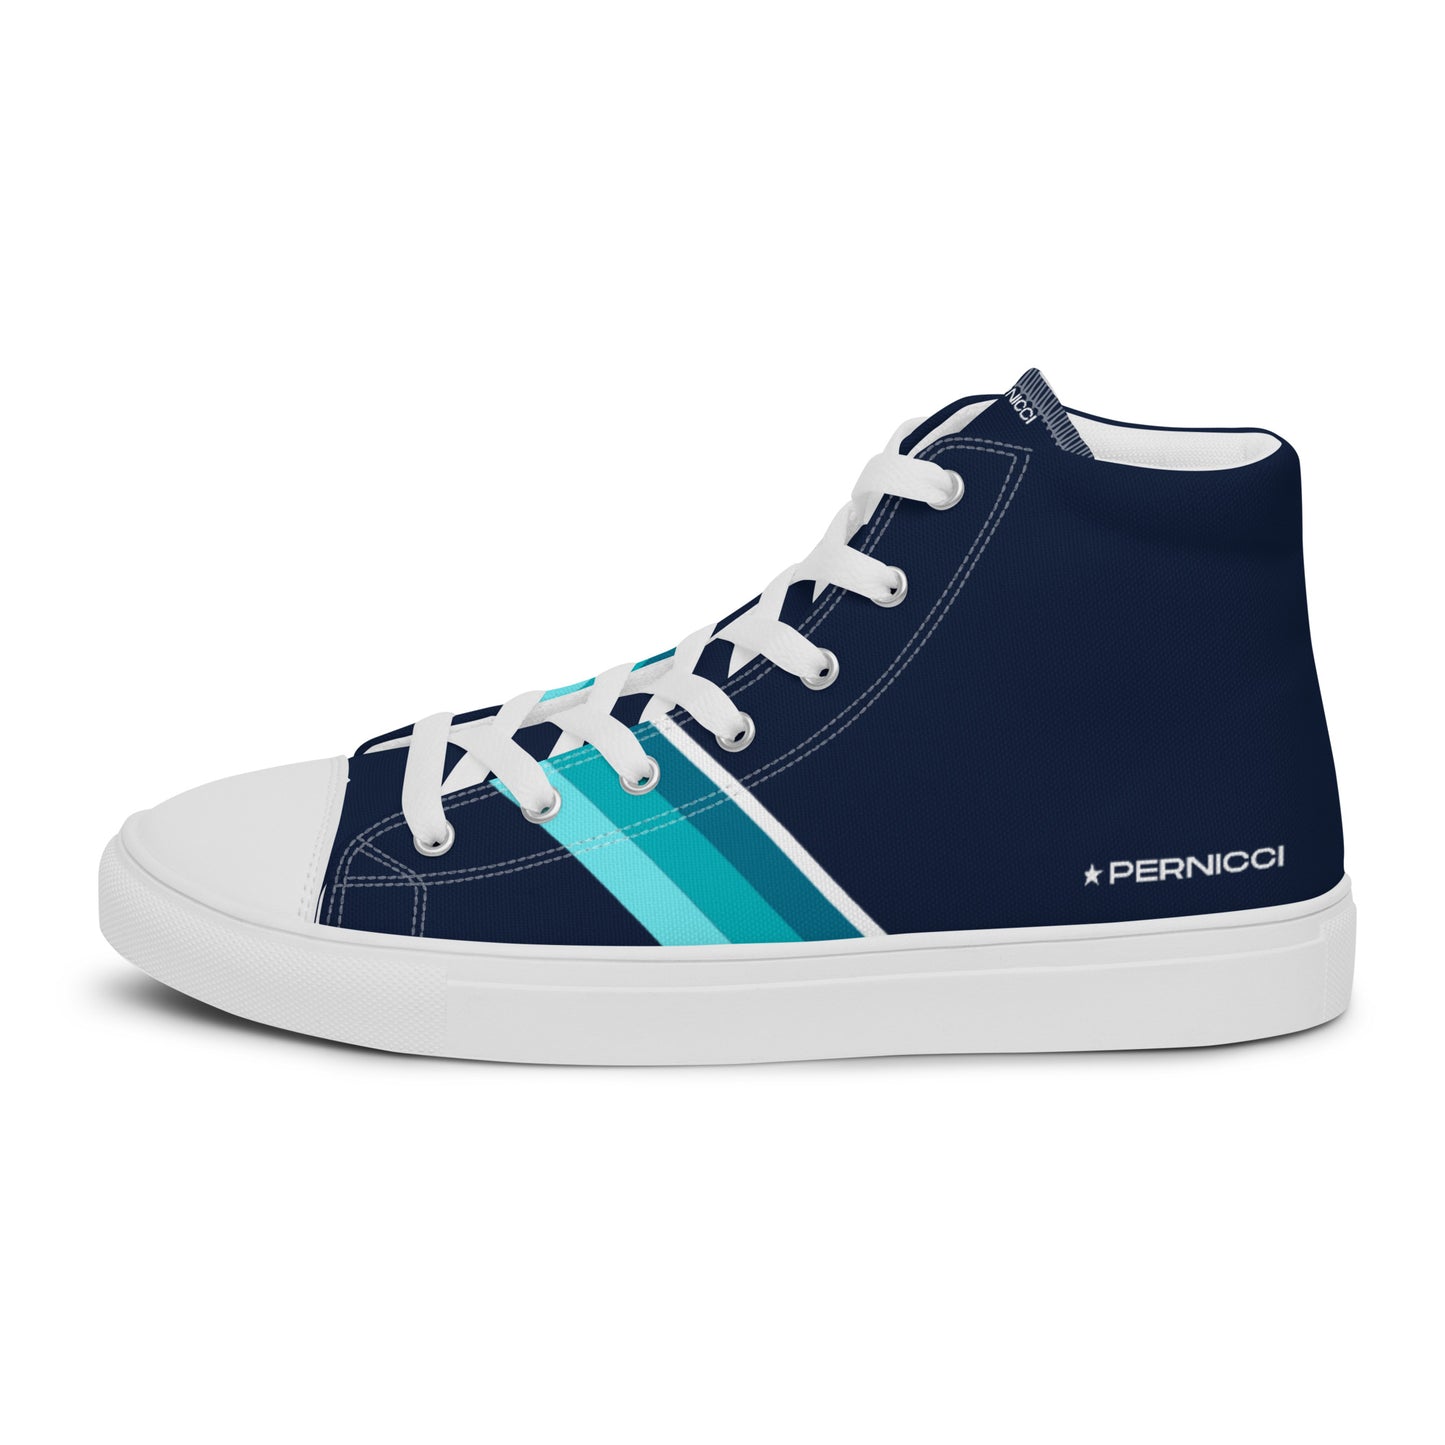 Men’s high top canvas shoes Star P5 NAVY